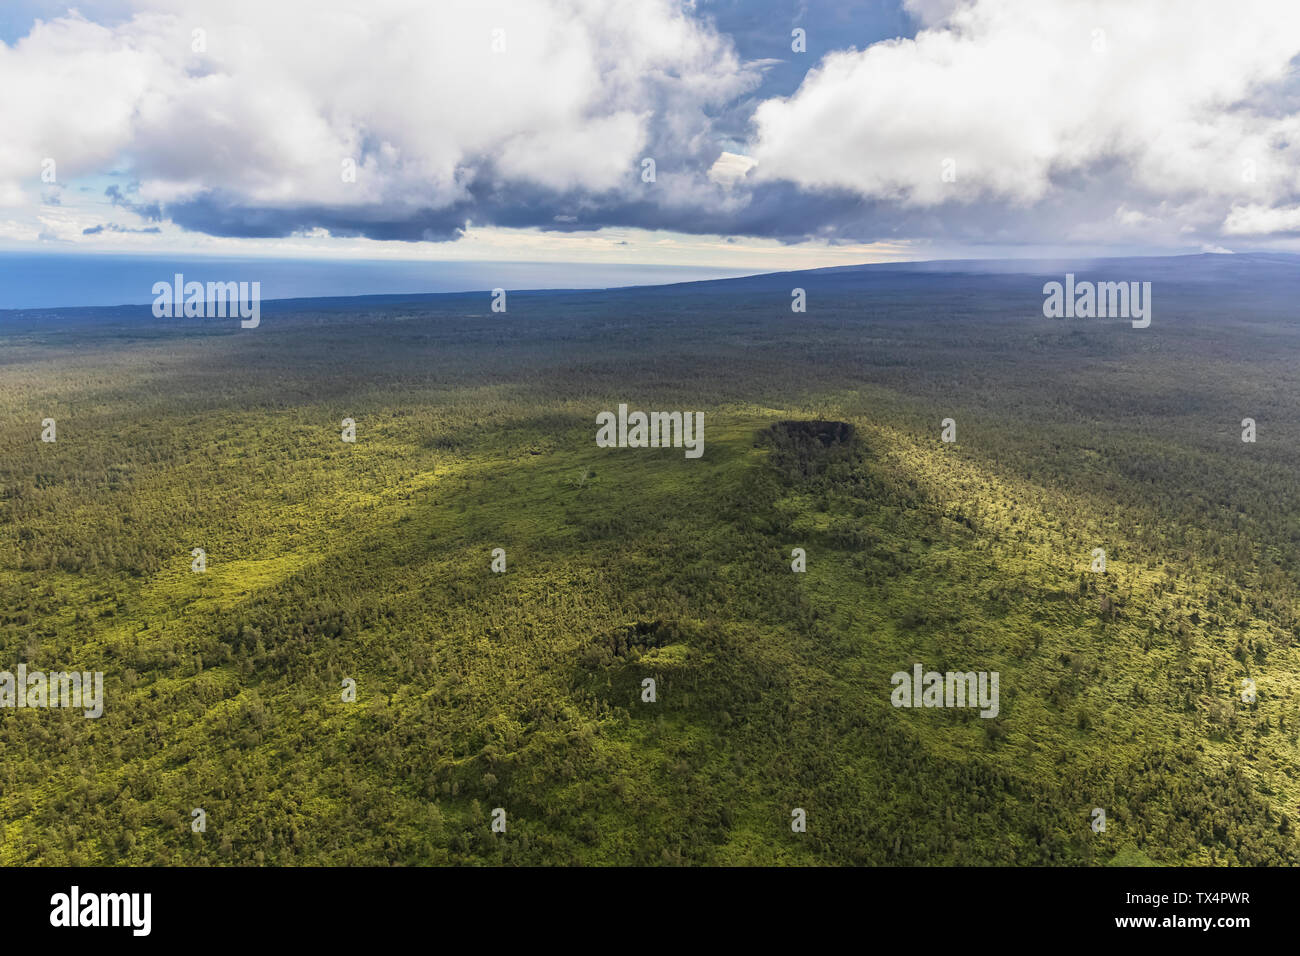 USA, Hawaii, Big Island, aerial view of Puna Forest Reserve Stock Photo